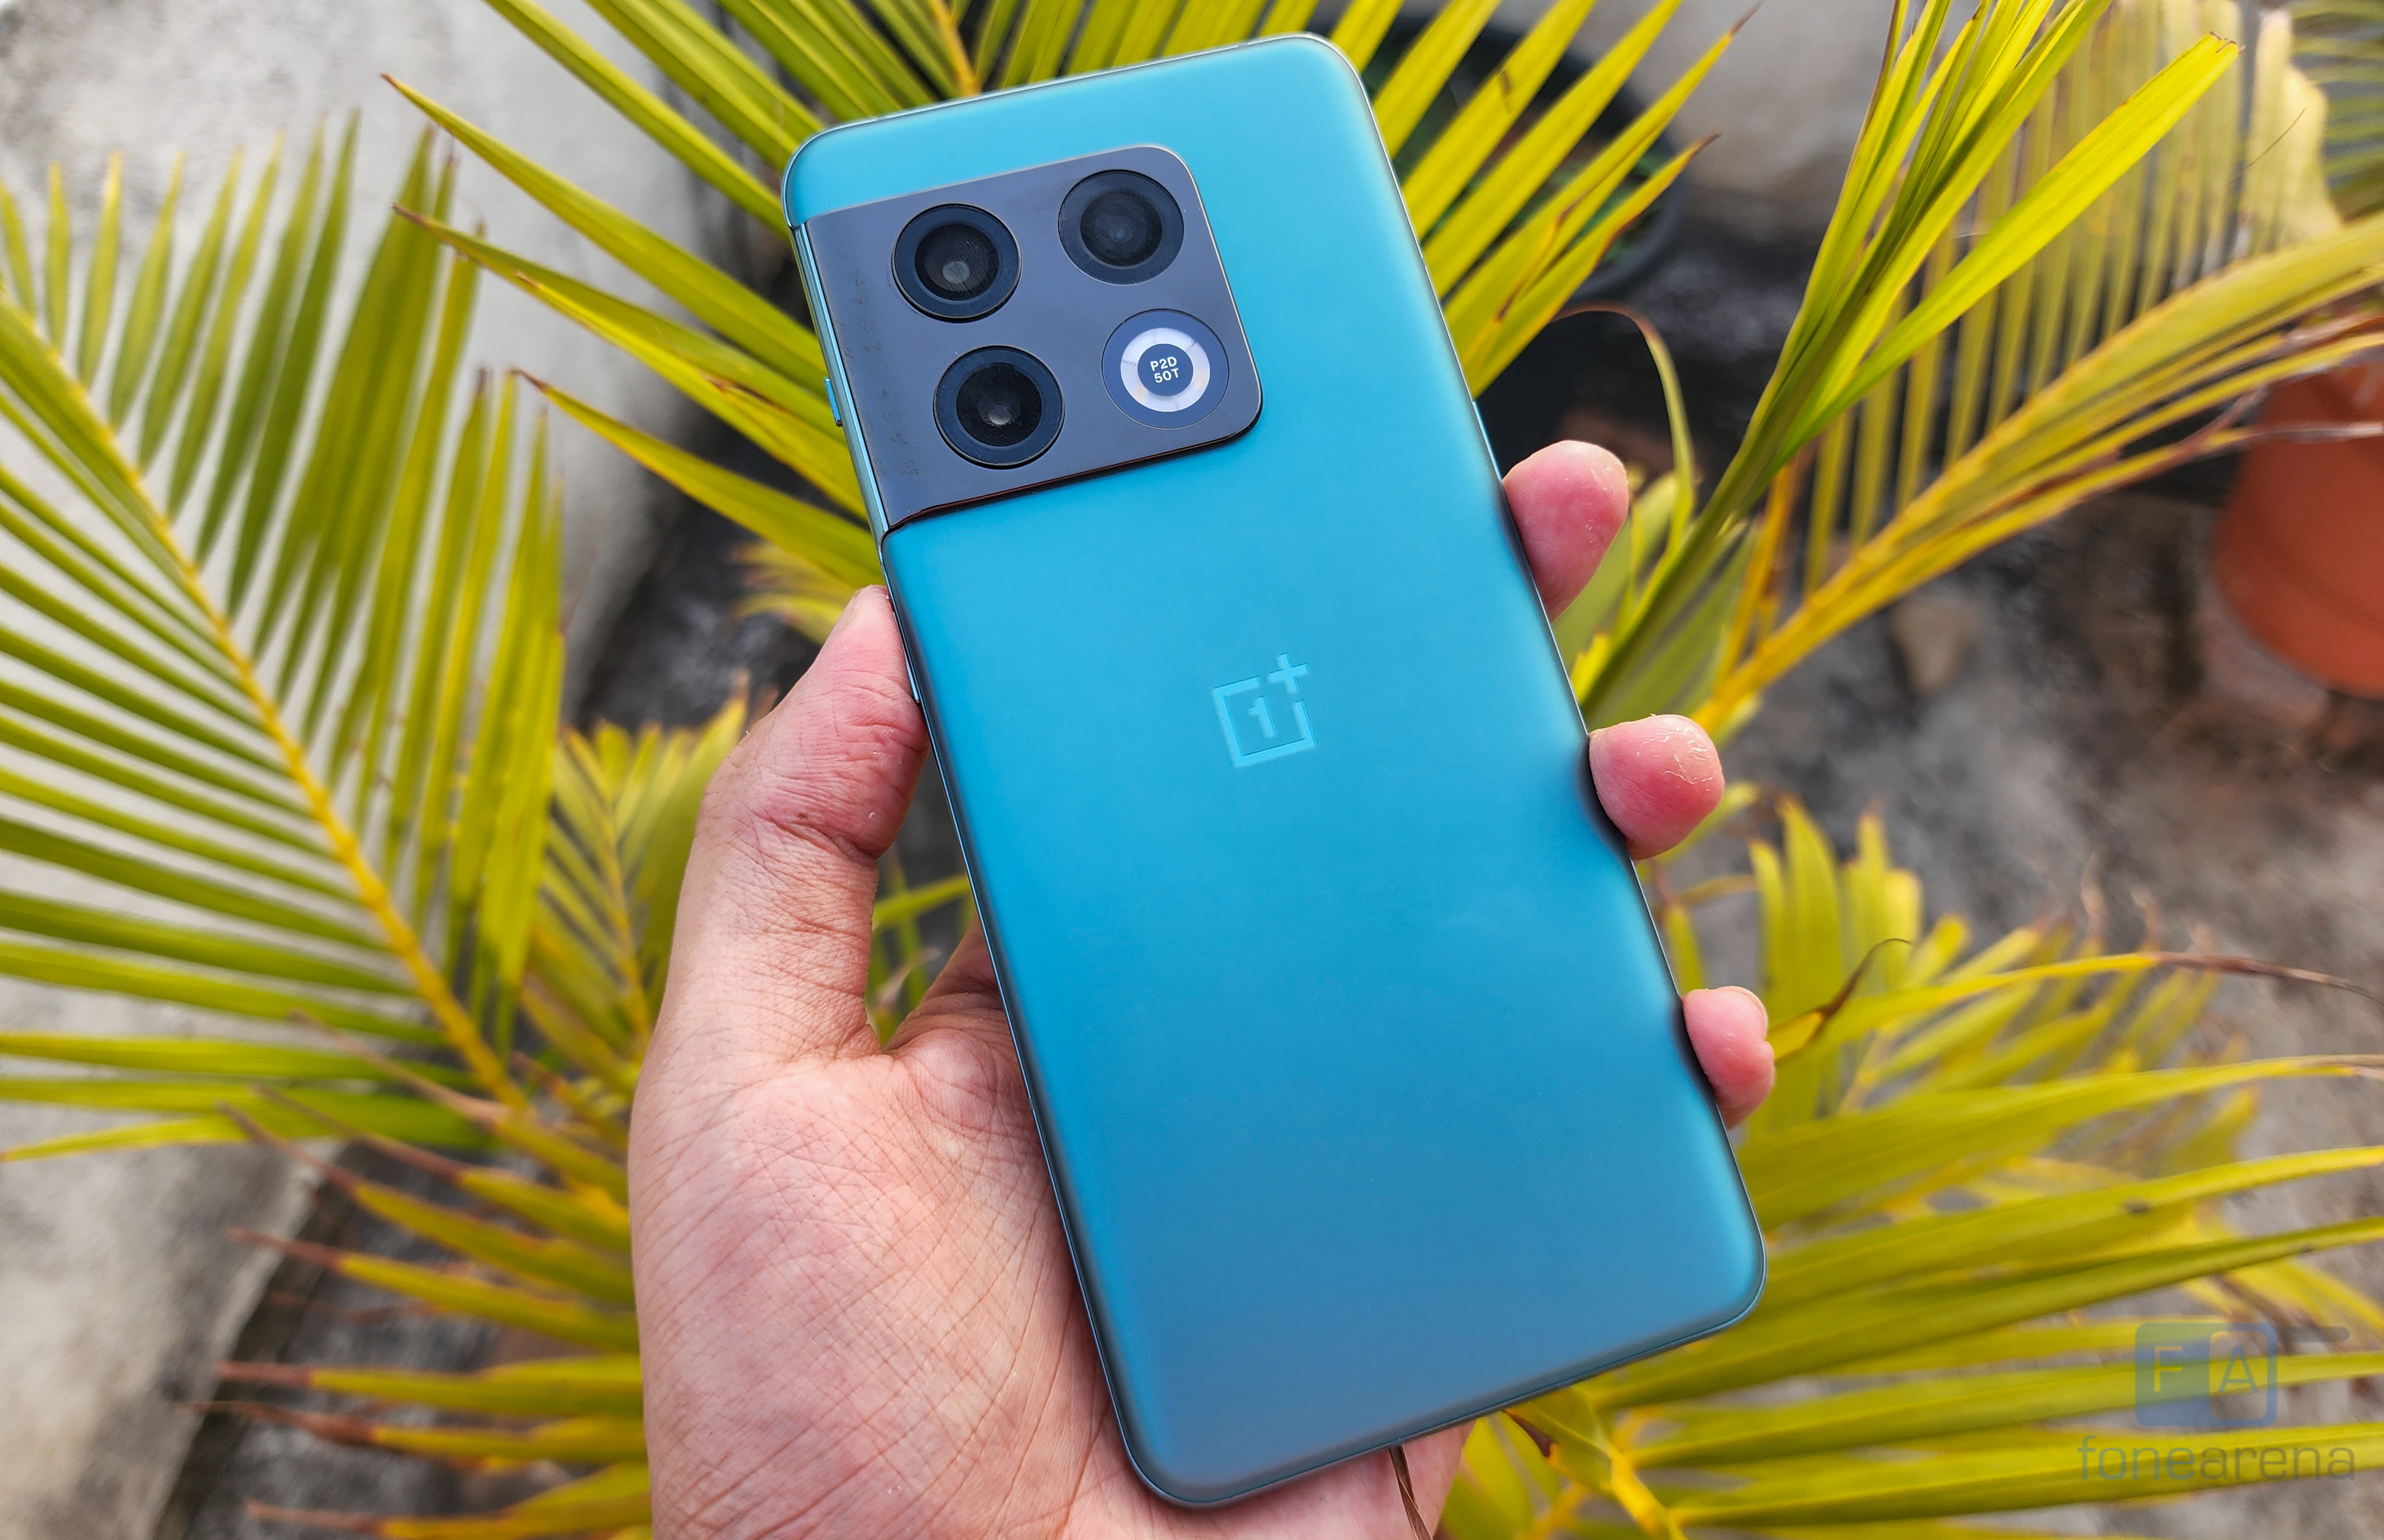 OnePlus 9 Pro review: a strong all-rounder